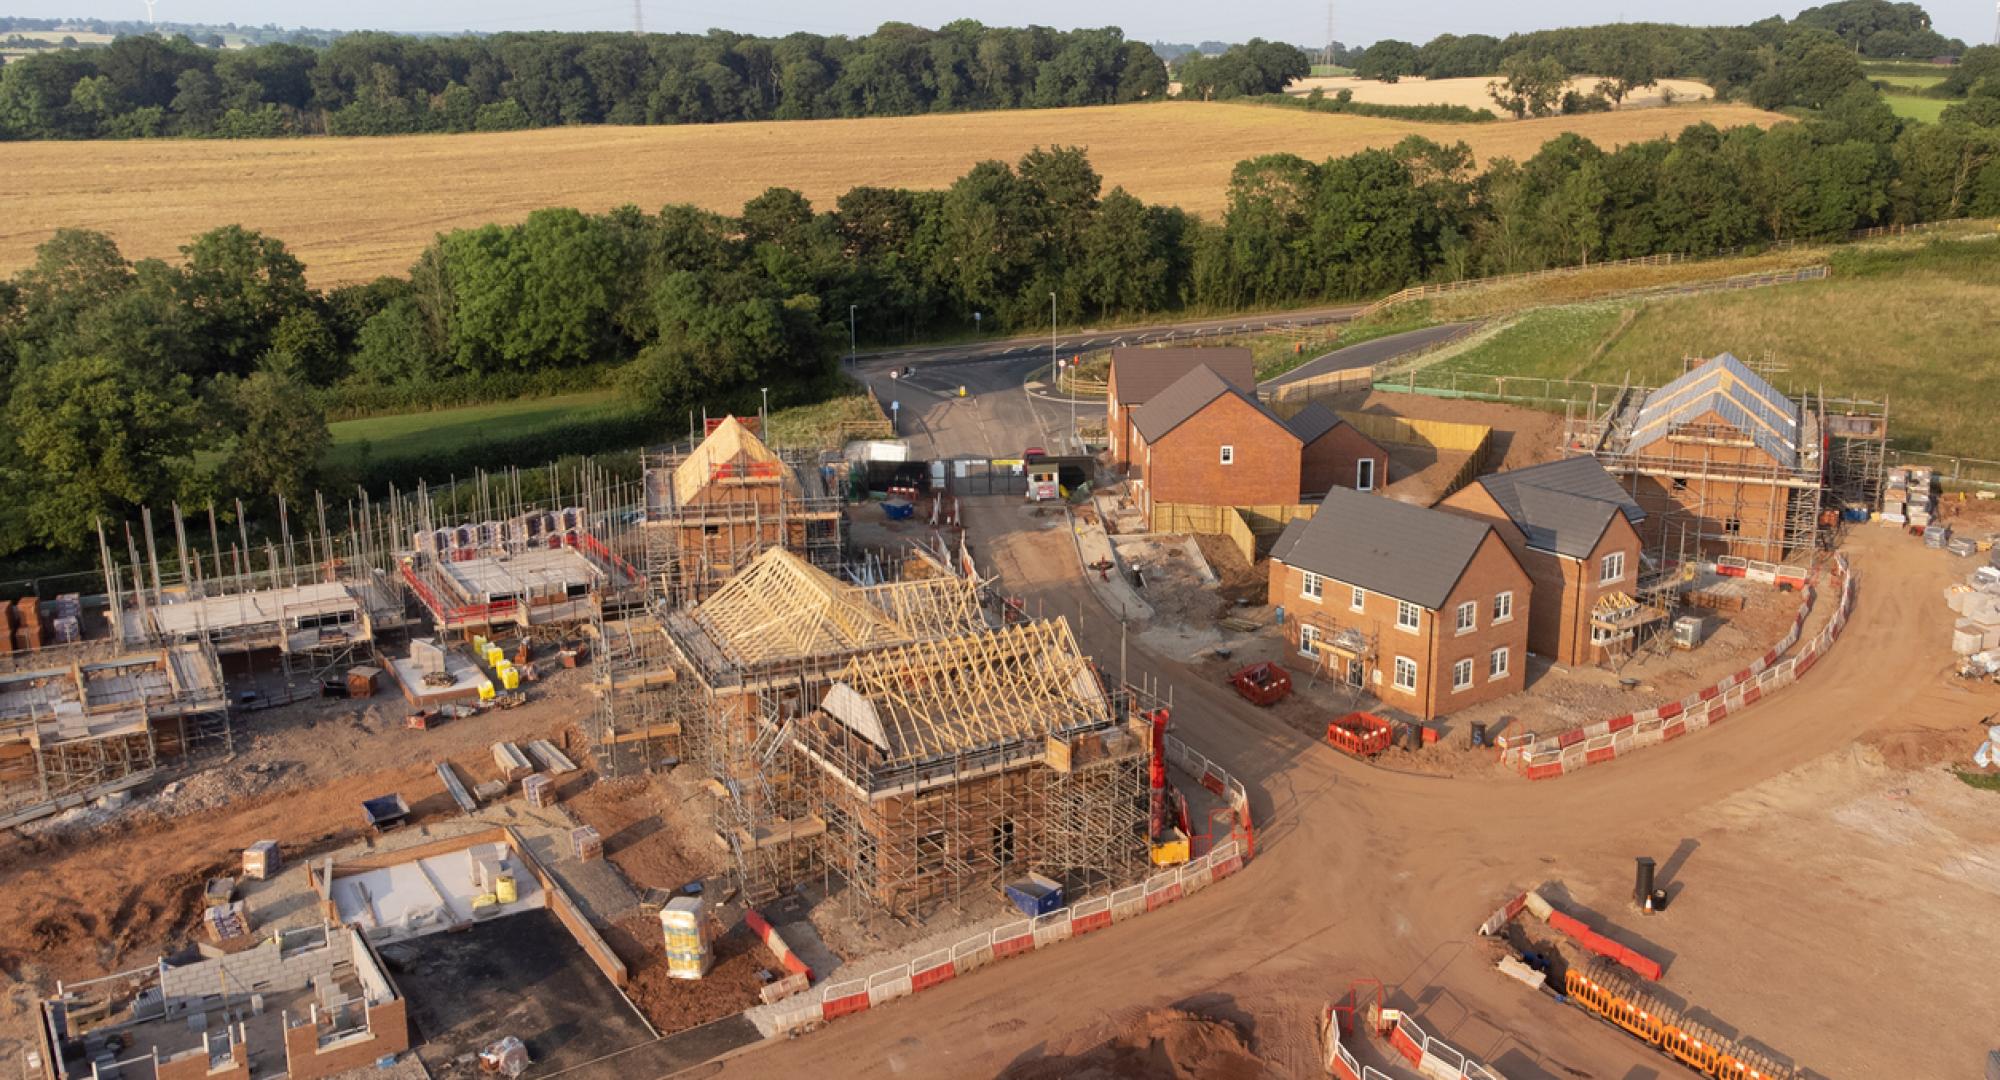 Aerial view looking down on new build housing construction site in England